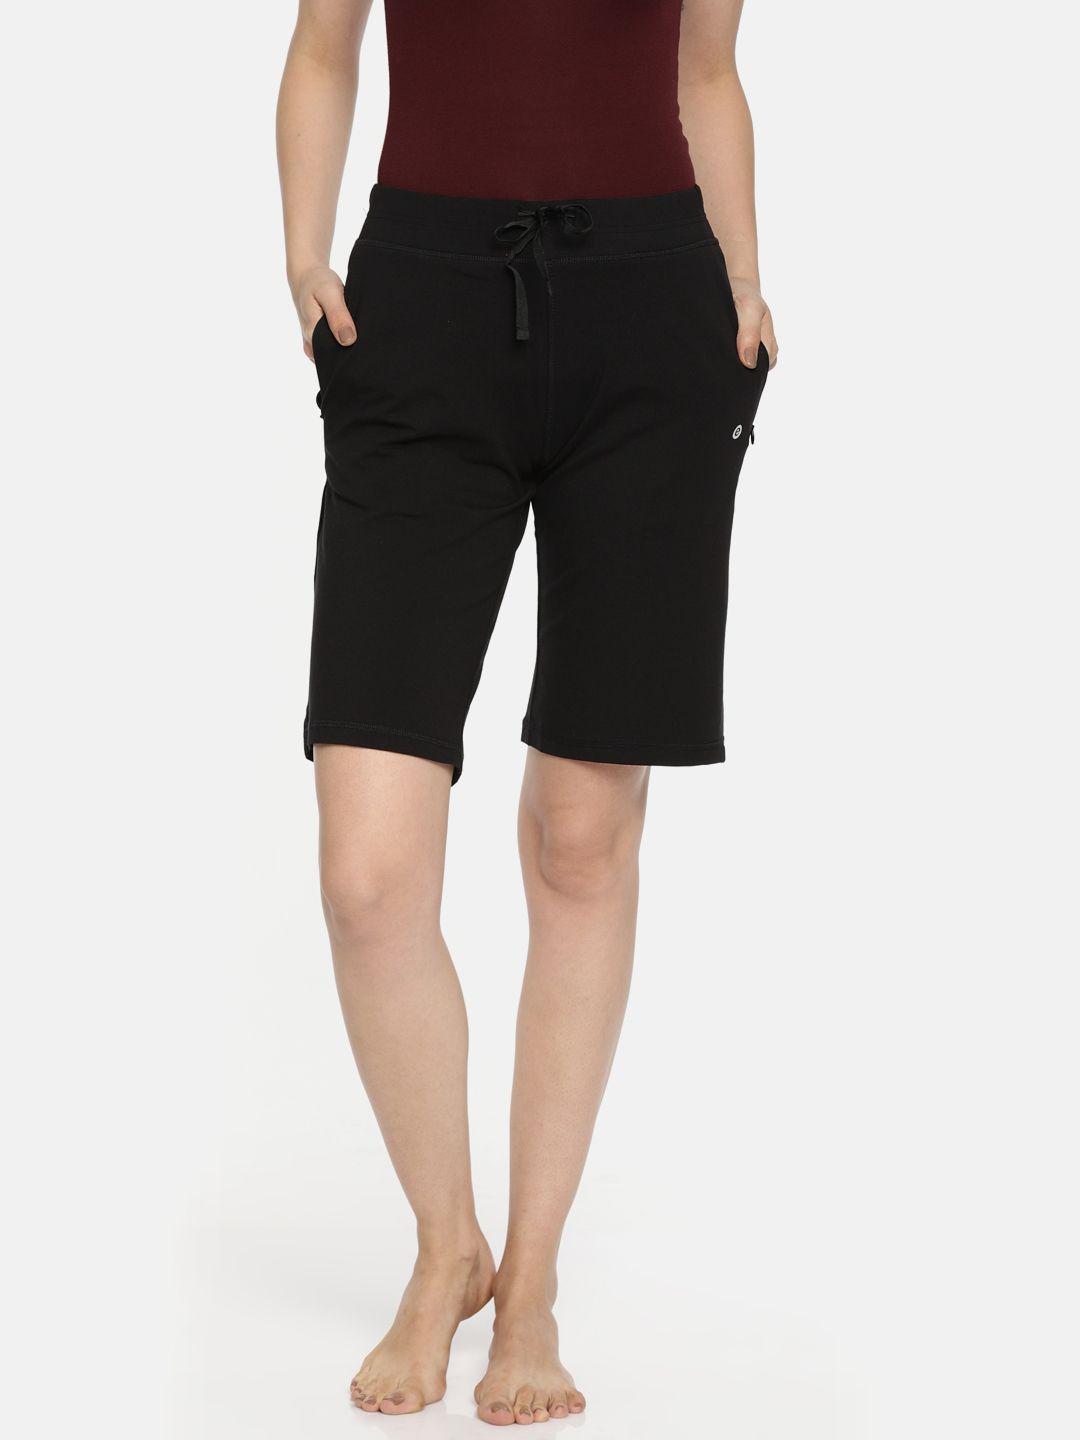 enamor women black relaxed fit lounge city shorts